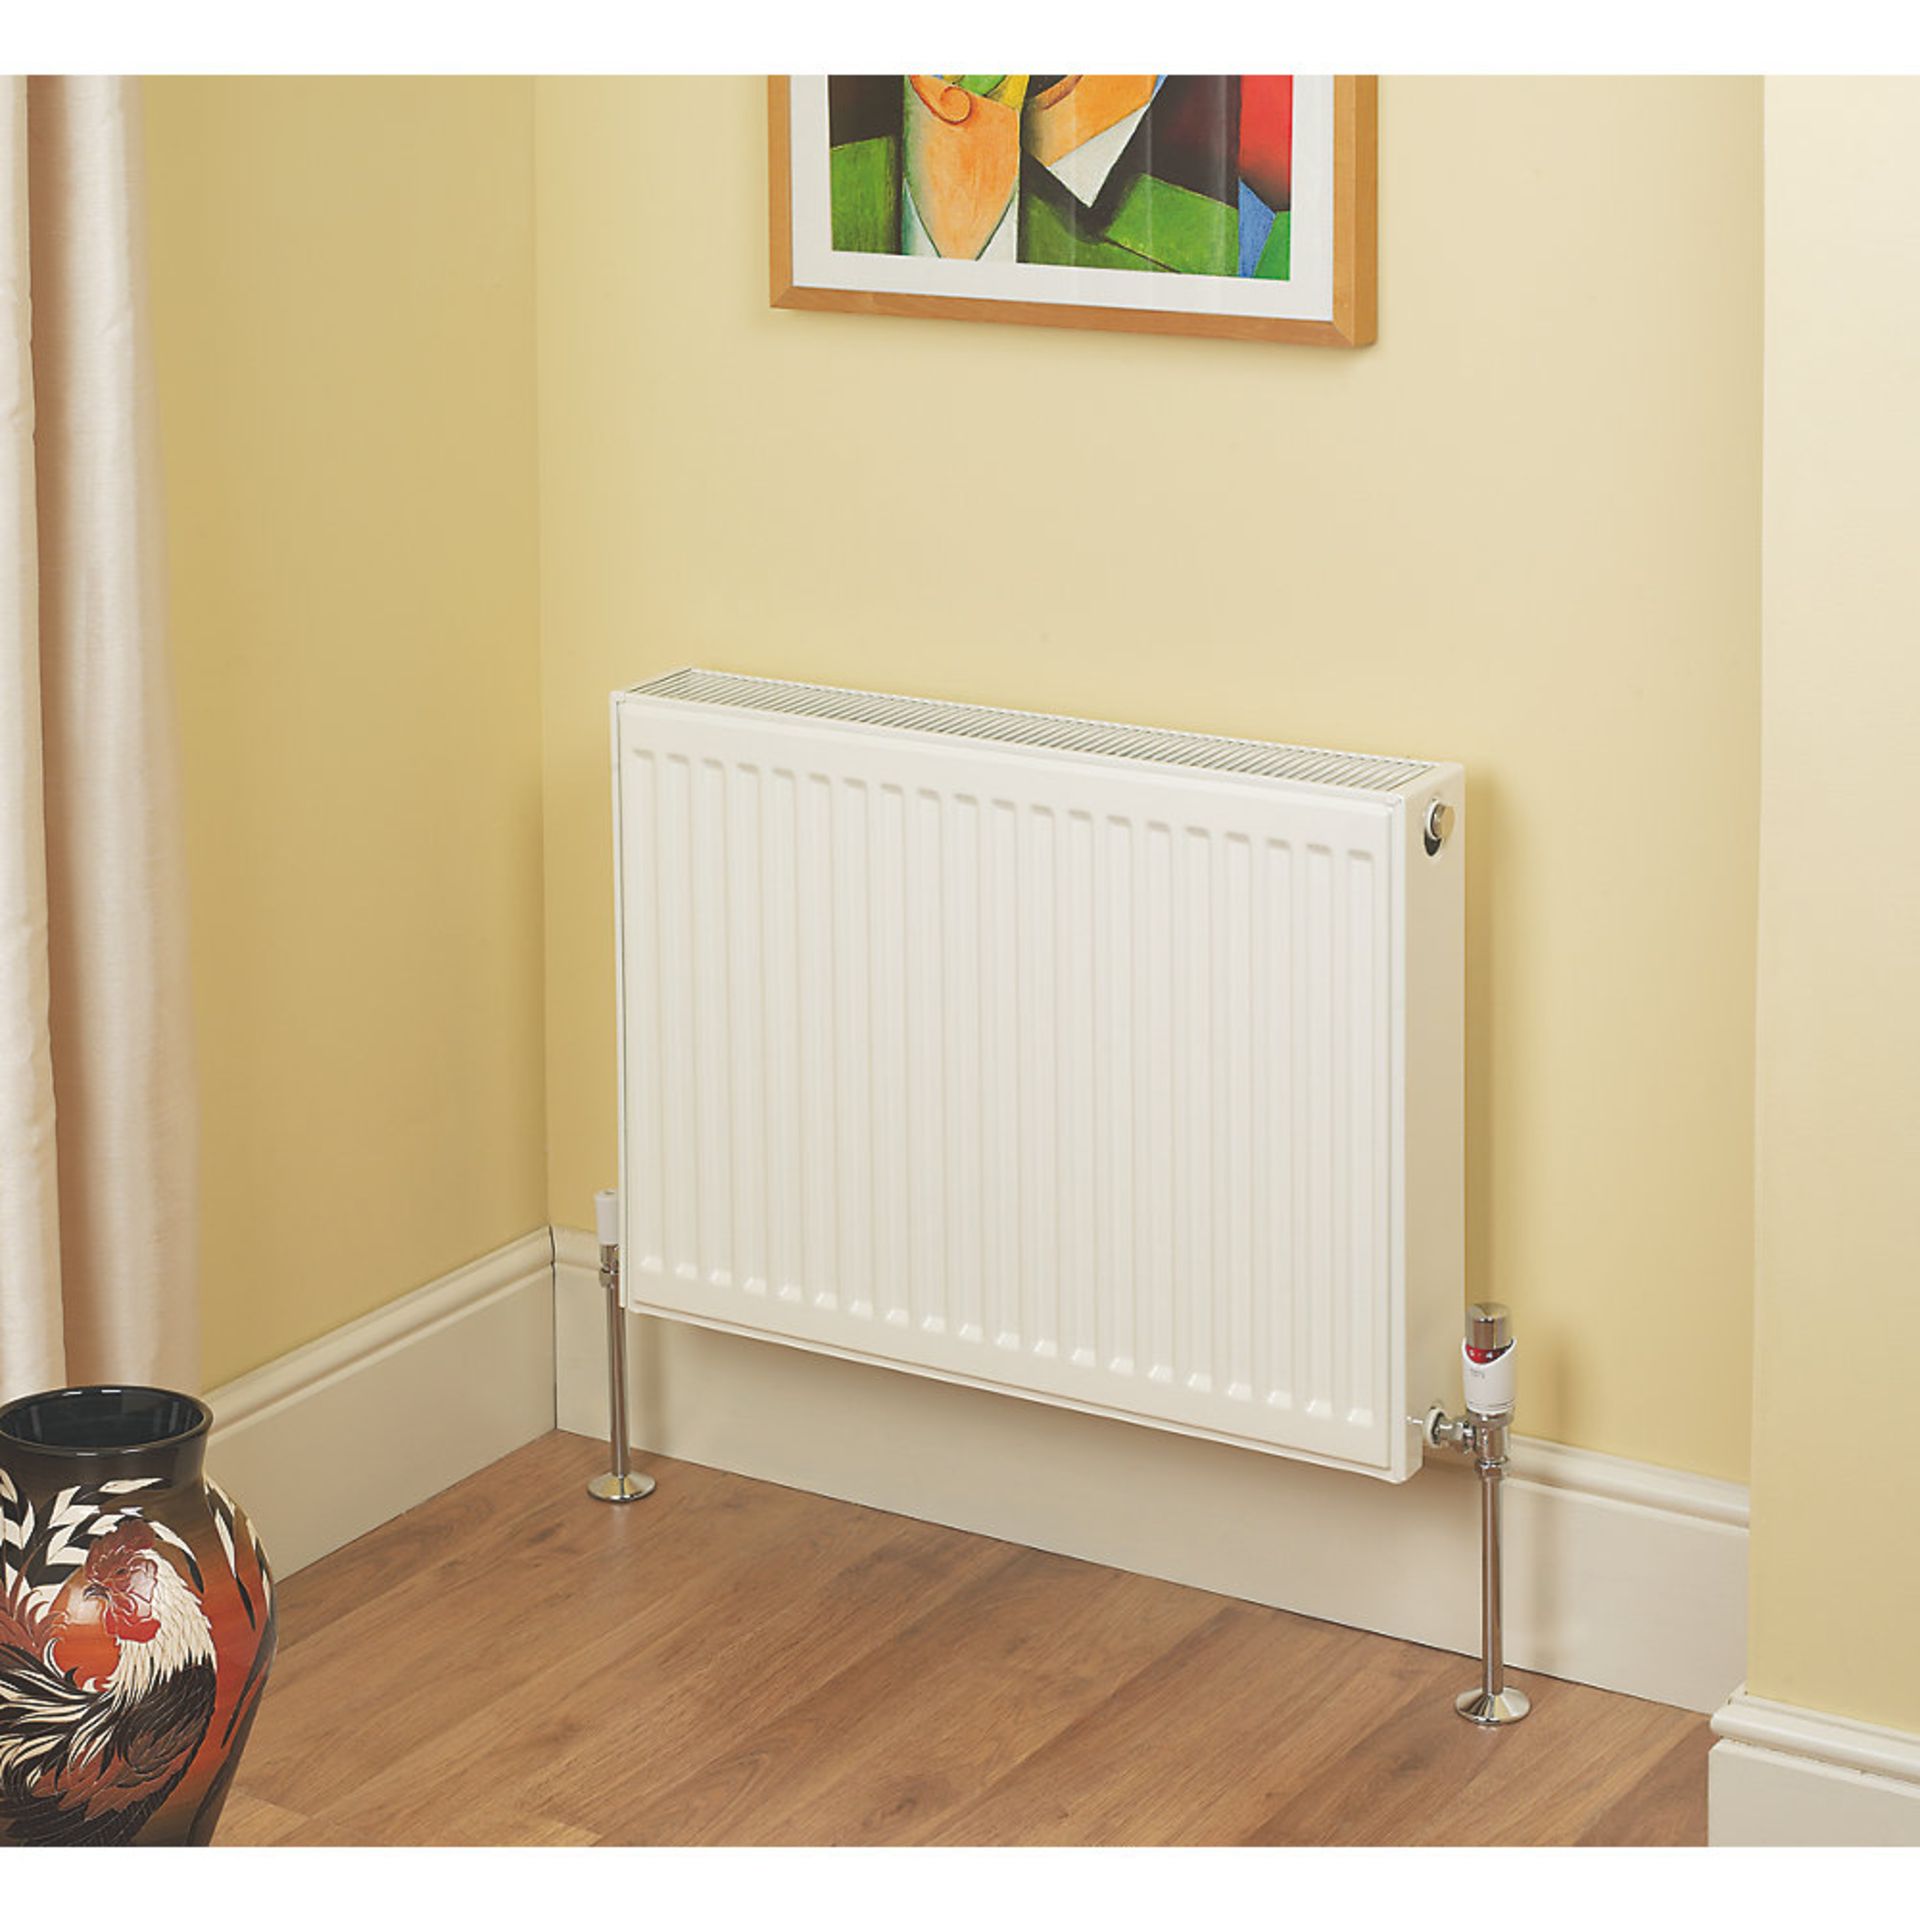 (RK1004) 600 X 700MM TYPE 22 DOUBLE-PANEL DOUBLE CONVECTOR RADIATOR WHITE. White convector ra... - Image 2 of 2